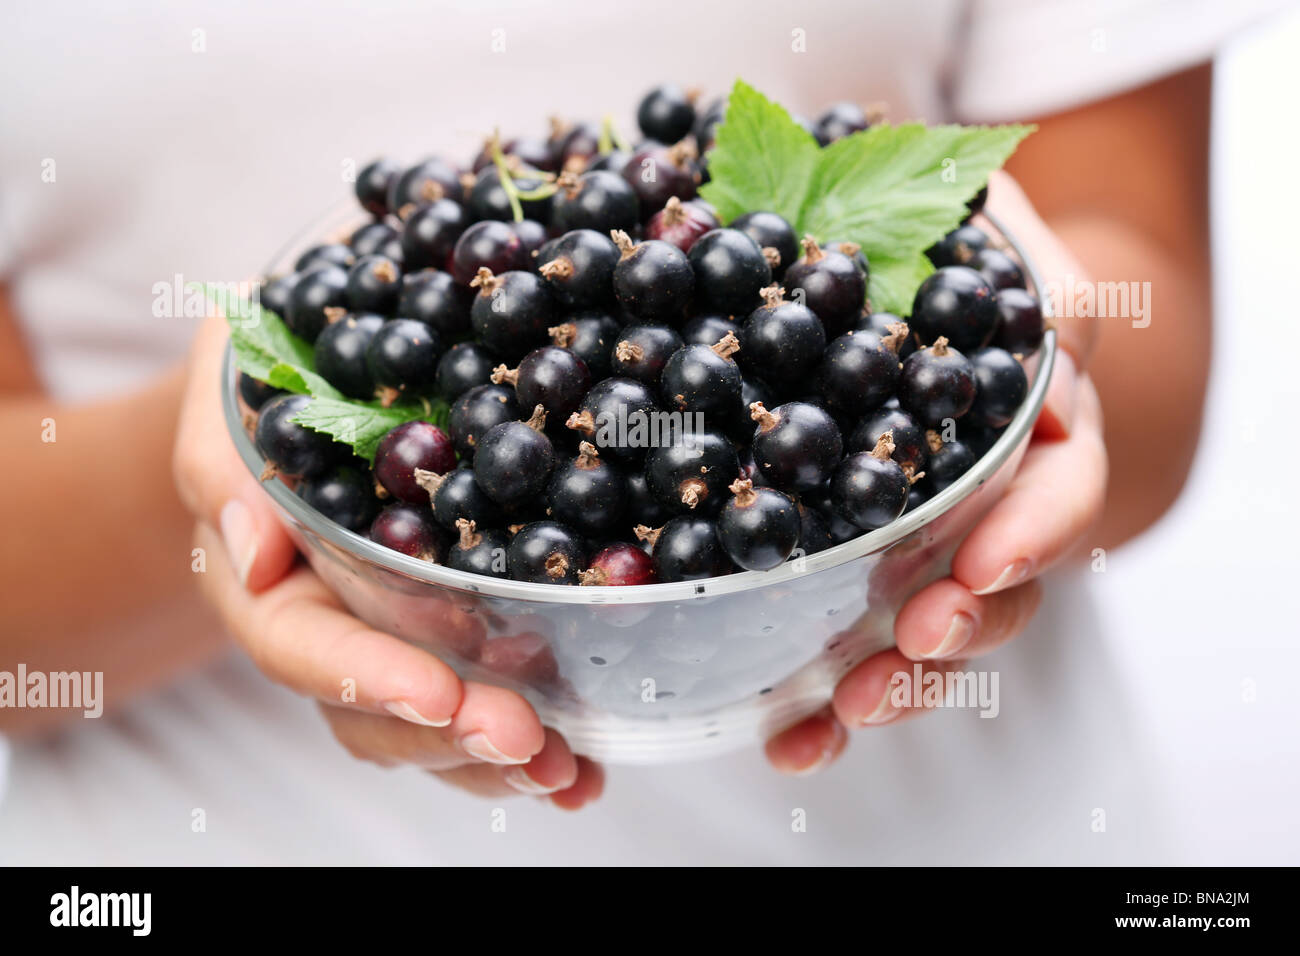 Crockery with black currant in woman hands. Stock Photo